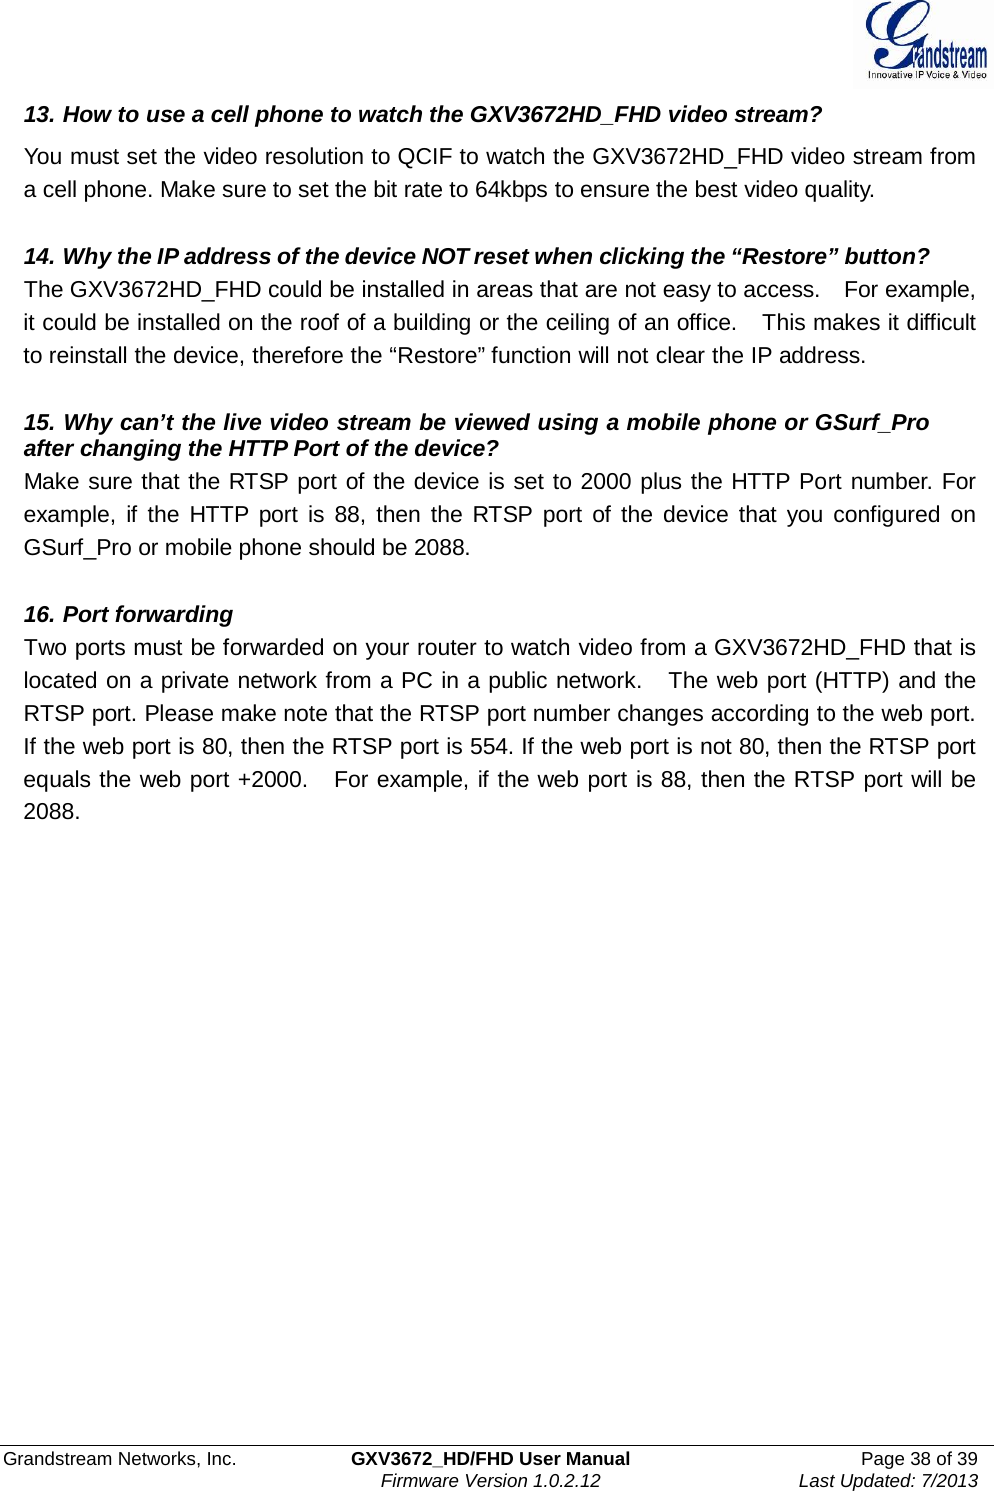  Grandstream Networks, Inc. GXV3672_HD/FHD User Manual Page 38 of 39   Firmware Version 1.0.2.12 Last Updated: 7/2013  13. How to use a cell phone to watch the GXV3672HD_FHD video stream?  You must set the video resolution to QCIF to watch the GXV3672HD_FHD video stream from a cell phone. Make sure to set the bit rate to 64kbps to ensure the best video quality.   14. Why the IP address of the device NOT reset when clicking the “Restore” button? The GXV3672HD_FHD could be installed in areas that are not easy to access.    For example, it could be installed on the roof of a building or the ceiling of an office.   This makes it difficult to reinstall the device, therefore the “Restore” function will not clear the IP address.       15. Why can’t the live video stream be viewed using a mobile phone or GSurf_Pro  after changing the HTTP Port of the device? Make sure that the RTSP port of the device is set to 2000 plus the HTTP Port number. For example,  if  the  HTTP port  is 88,  then the  RTSP port  of  the  device that  you  configured on GSurf_Pro or mobile phone should be 2088.   16. Port forwarding Two ports must be forwarded on your router to watch video from a GXV3672HD_FHD that is located on a private network from a PC in a public network.   The web port (HTTP) and the RTSP port. Please make note that the RTSP port number changes according to the web port. If the web port is 80, then the RTSP port is 554. If the web port is not 80, then the RTSP port equals the web port +2000.    For example, if the web port is 88, then the RTSP port will be 2088.   